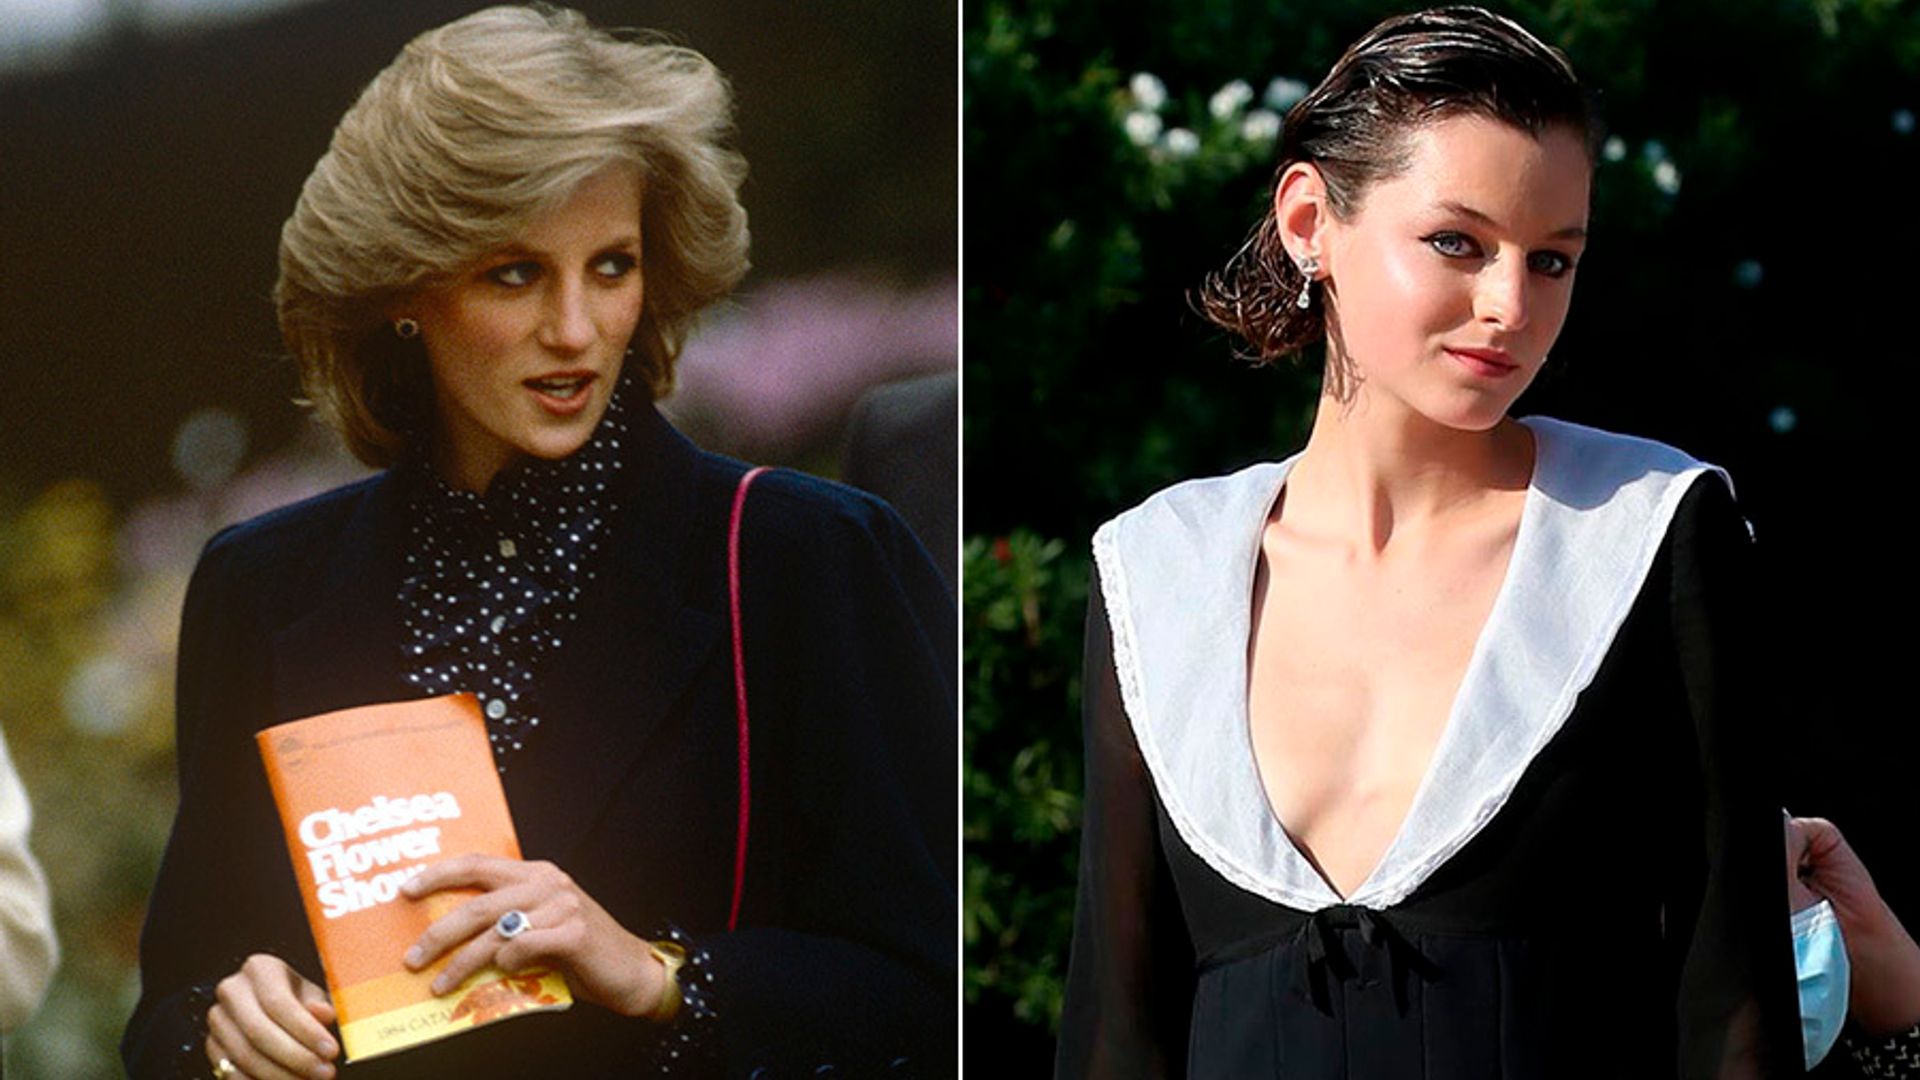 Emma Corrin opens up about playing Princess Diana in 'The Crown': 'I feel I’ve got to know Diana like you would a friend'